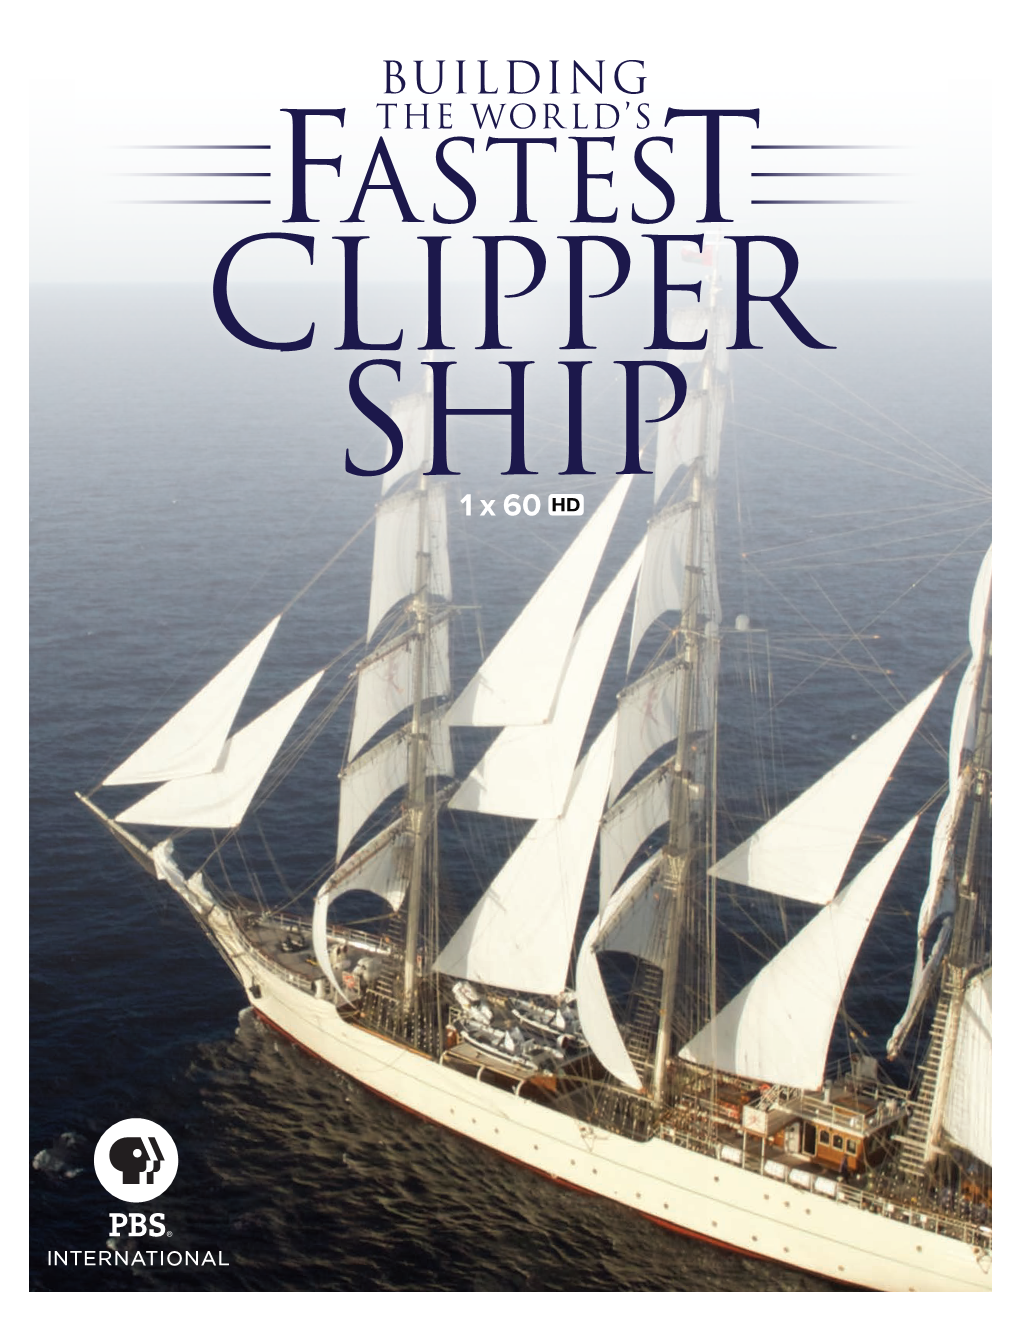 FASTEST CLIPPER SHIP 1 X 60 BUILDING Clipper Ships Changed the World with Their Cutting-Edge Technology